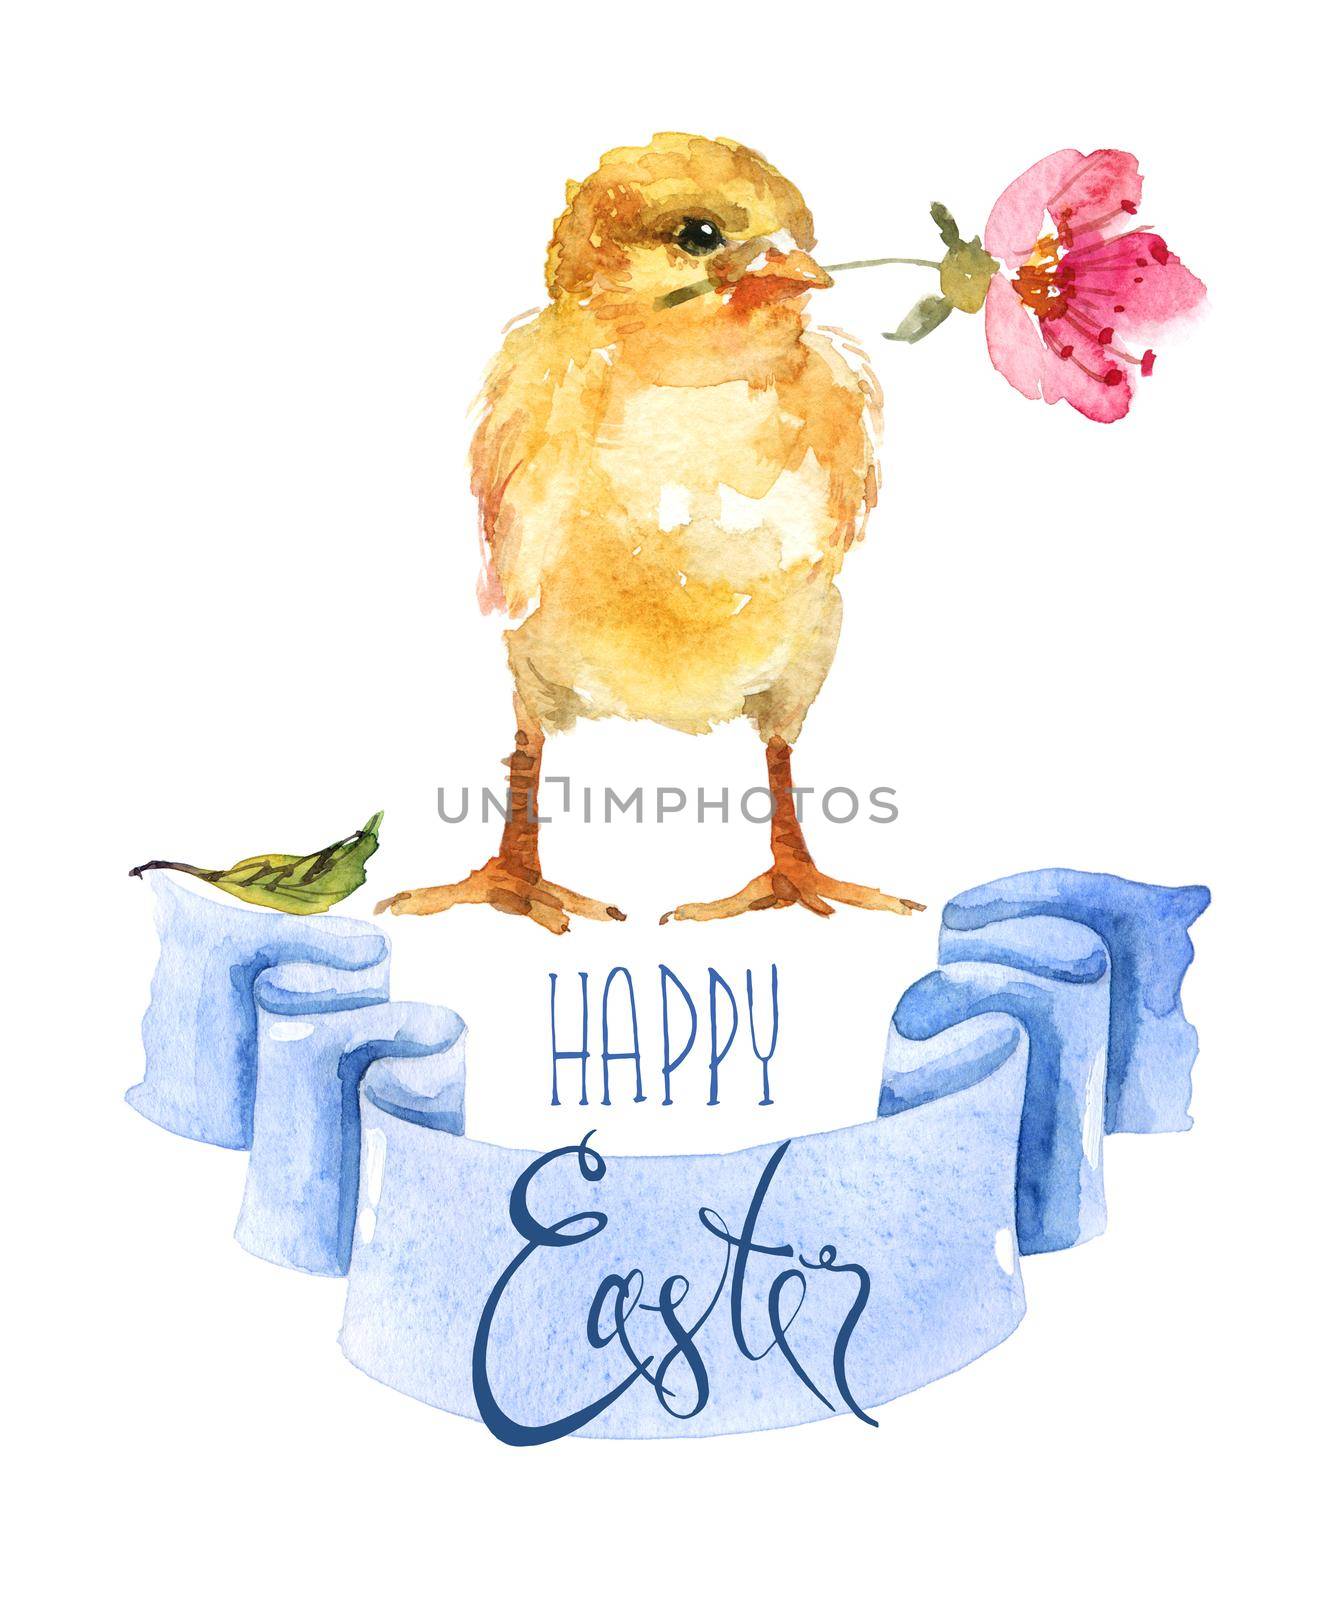 Watercolor greeting card design for Happy Easter - little yellow chick with pink flower in beak, banner with blue lent and calligraphy lettering